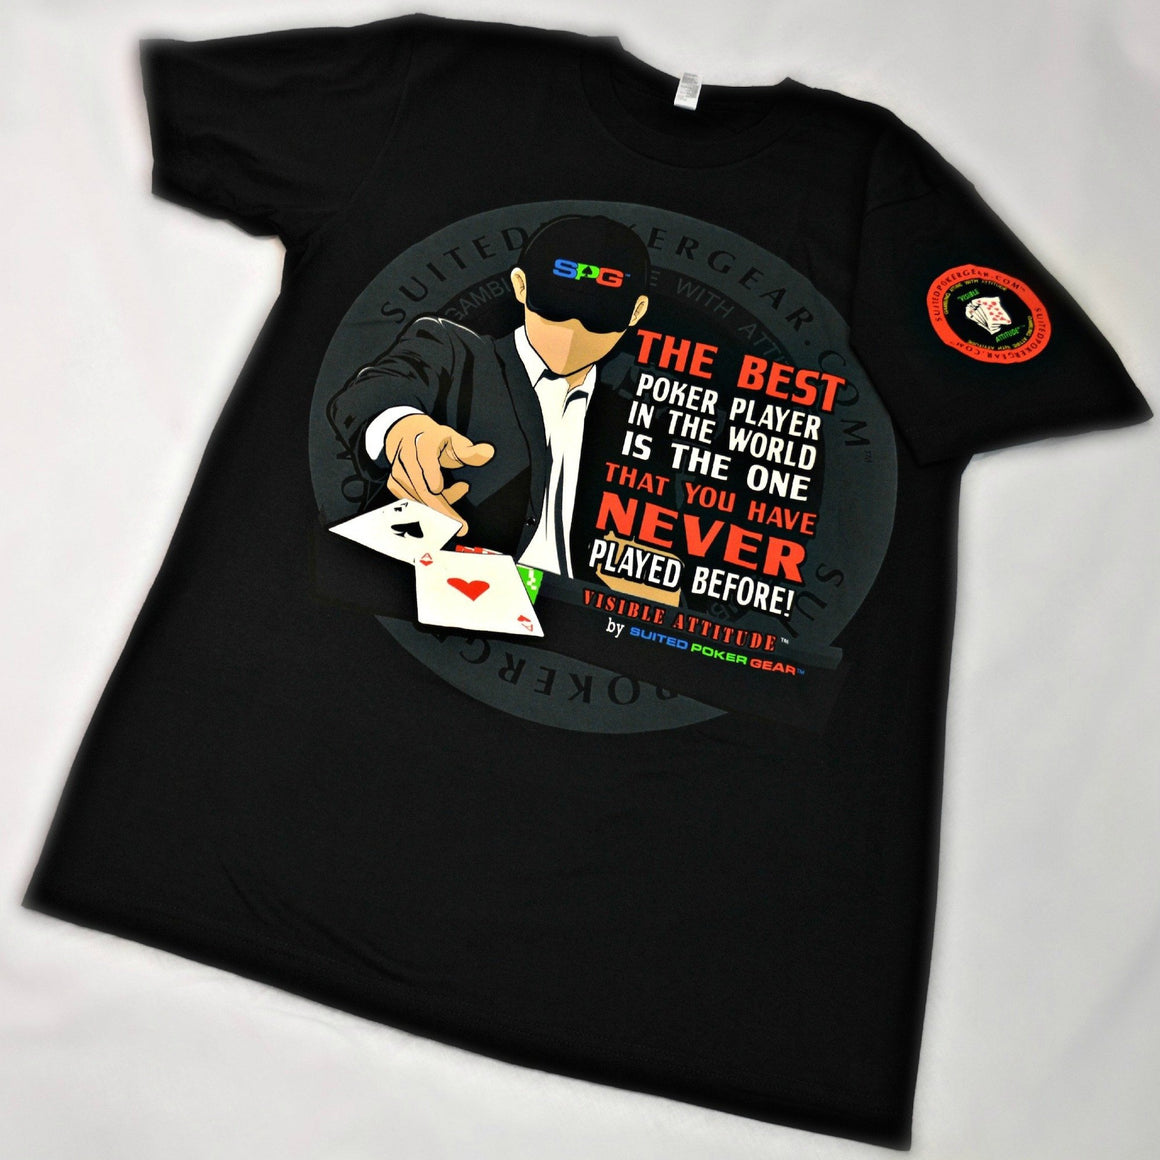 "Best Poker Player in the World" - Suited Poker Gear